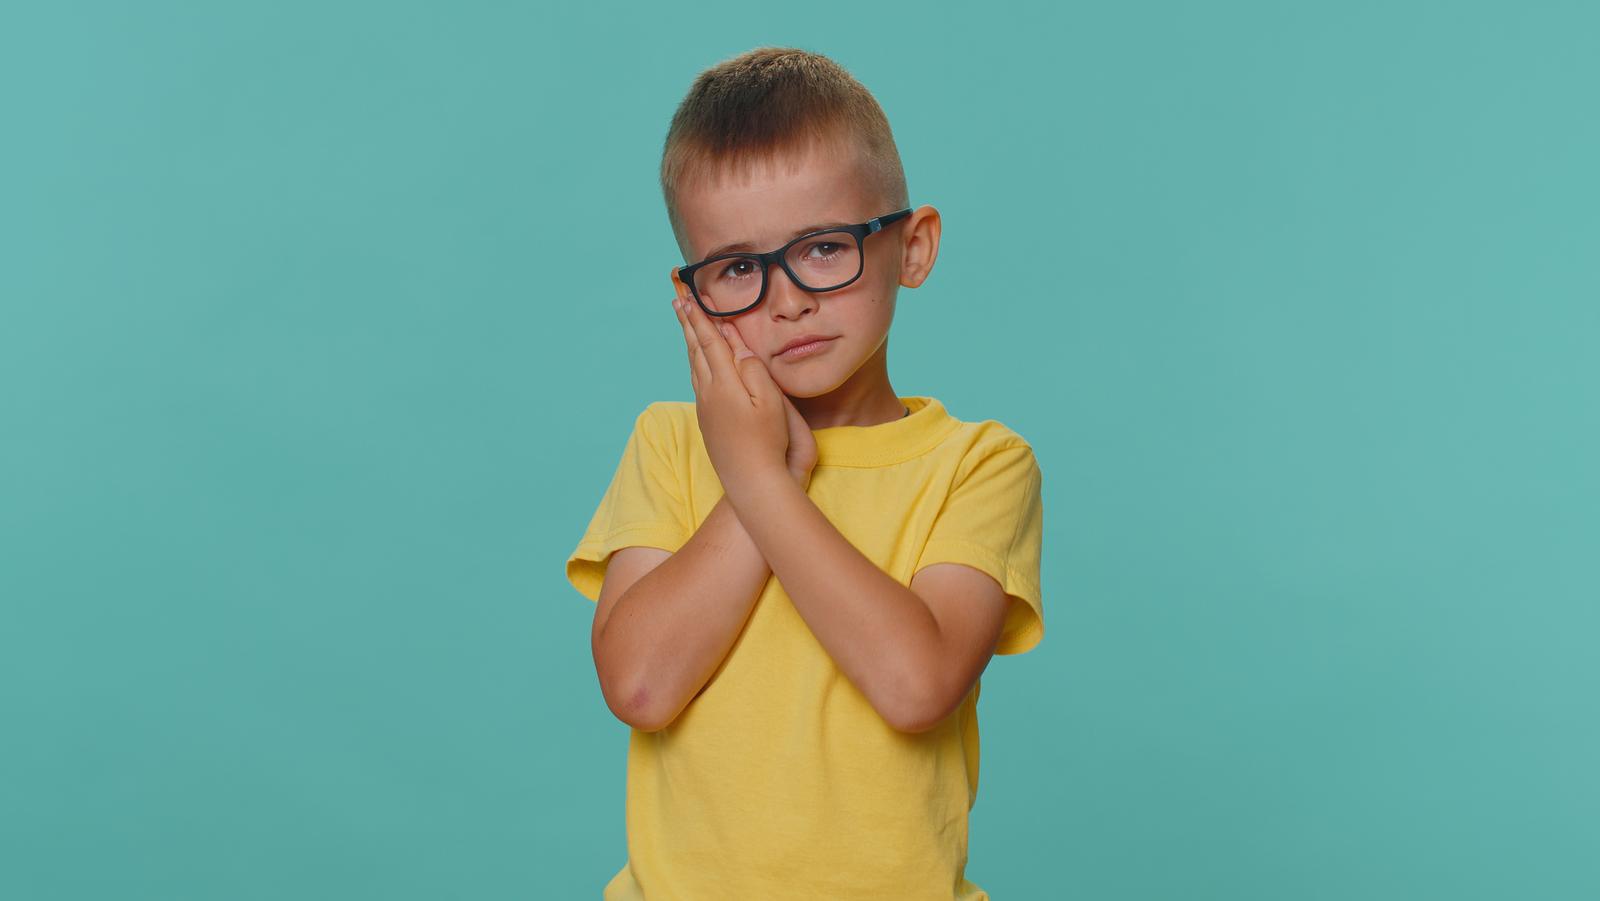 A young boy wearing glasses and covering his face with his hands while receiving tips for keeping his teeth healthy.